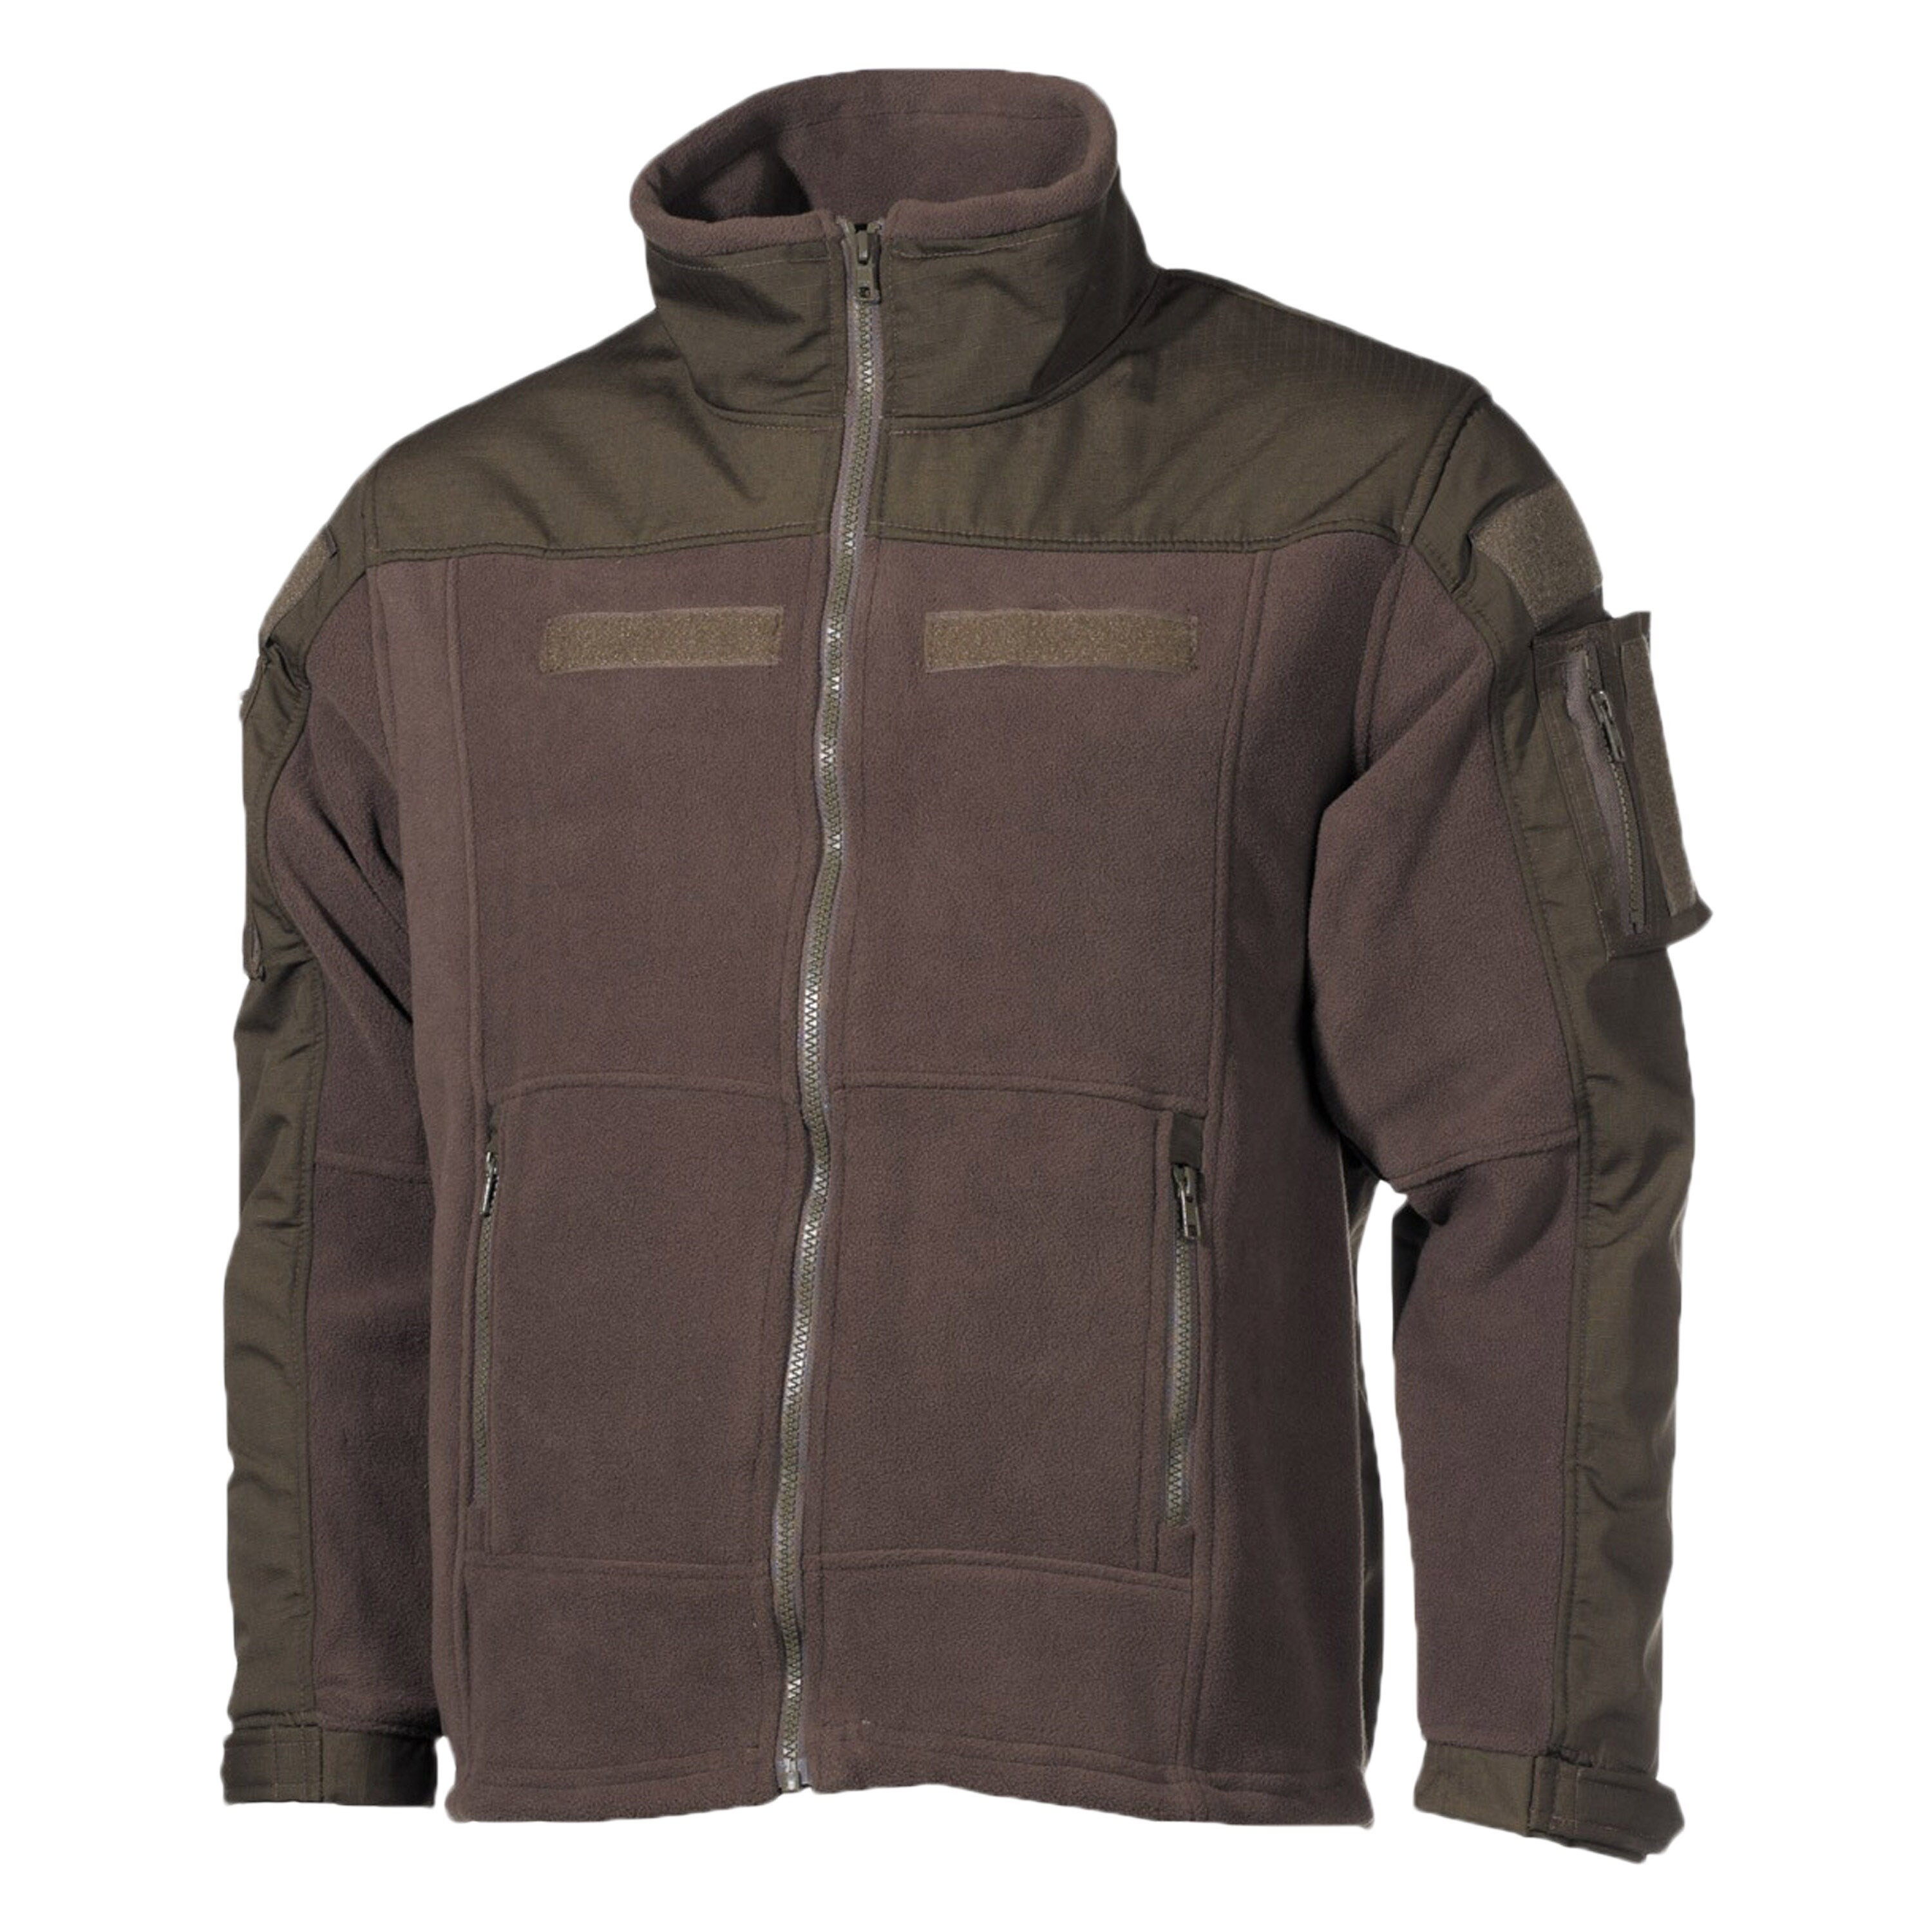 Purchase the Fleece Jacket Combat olive by ASMC